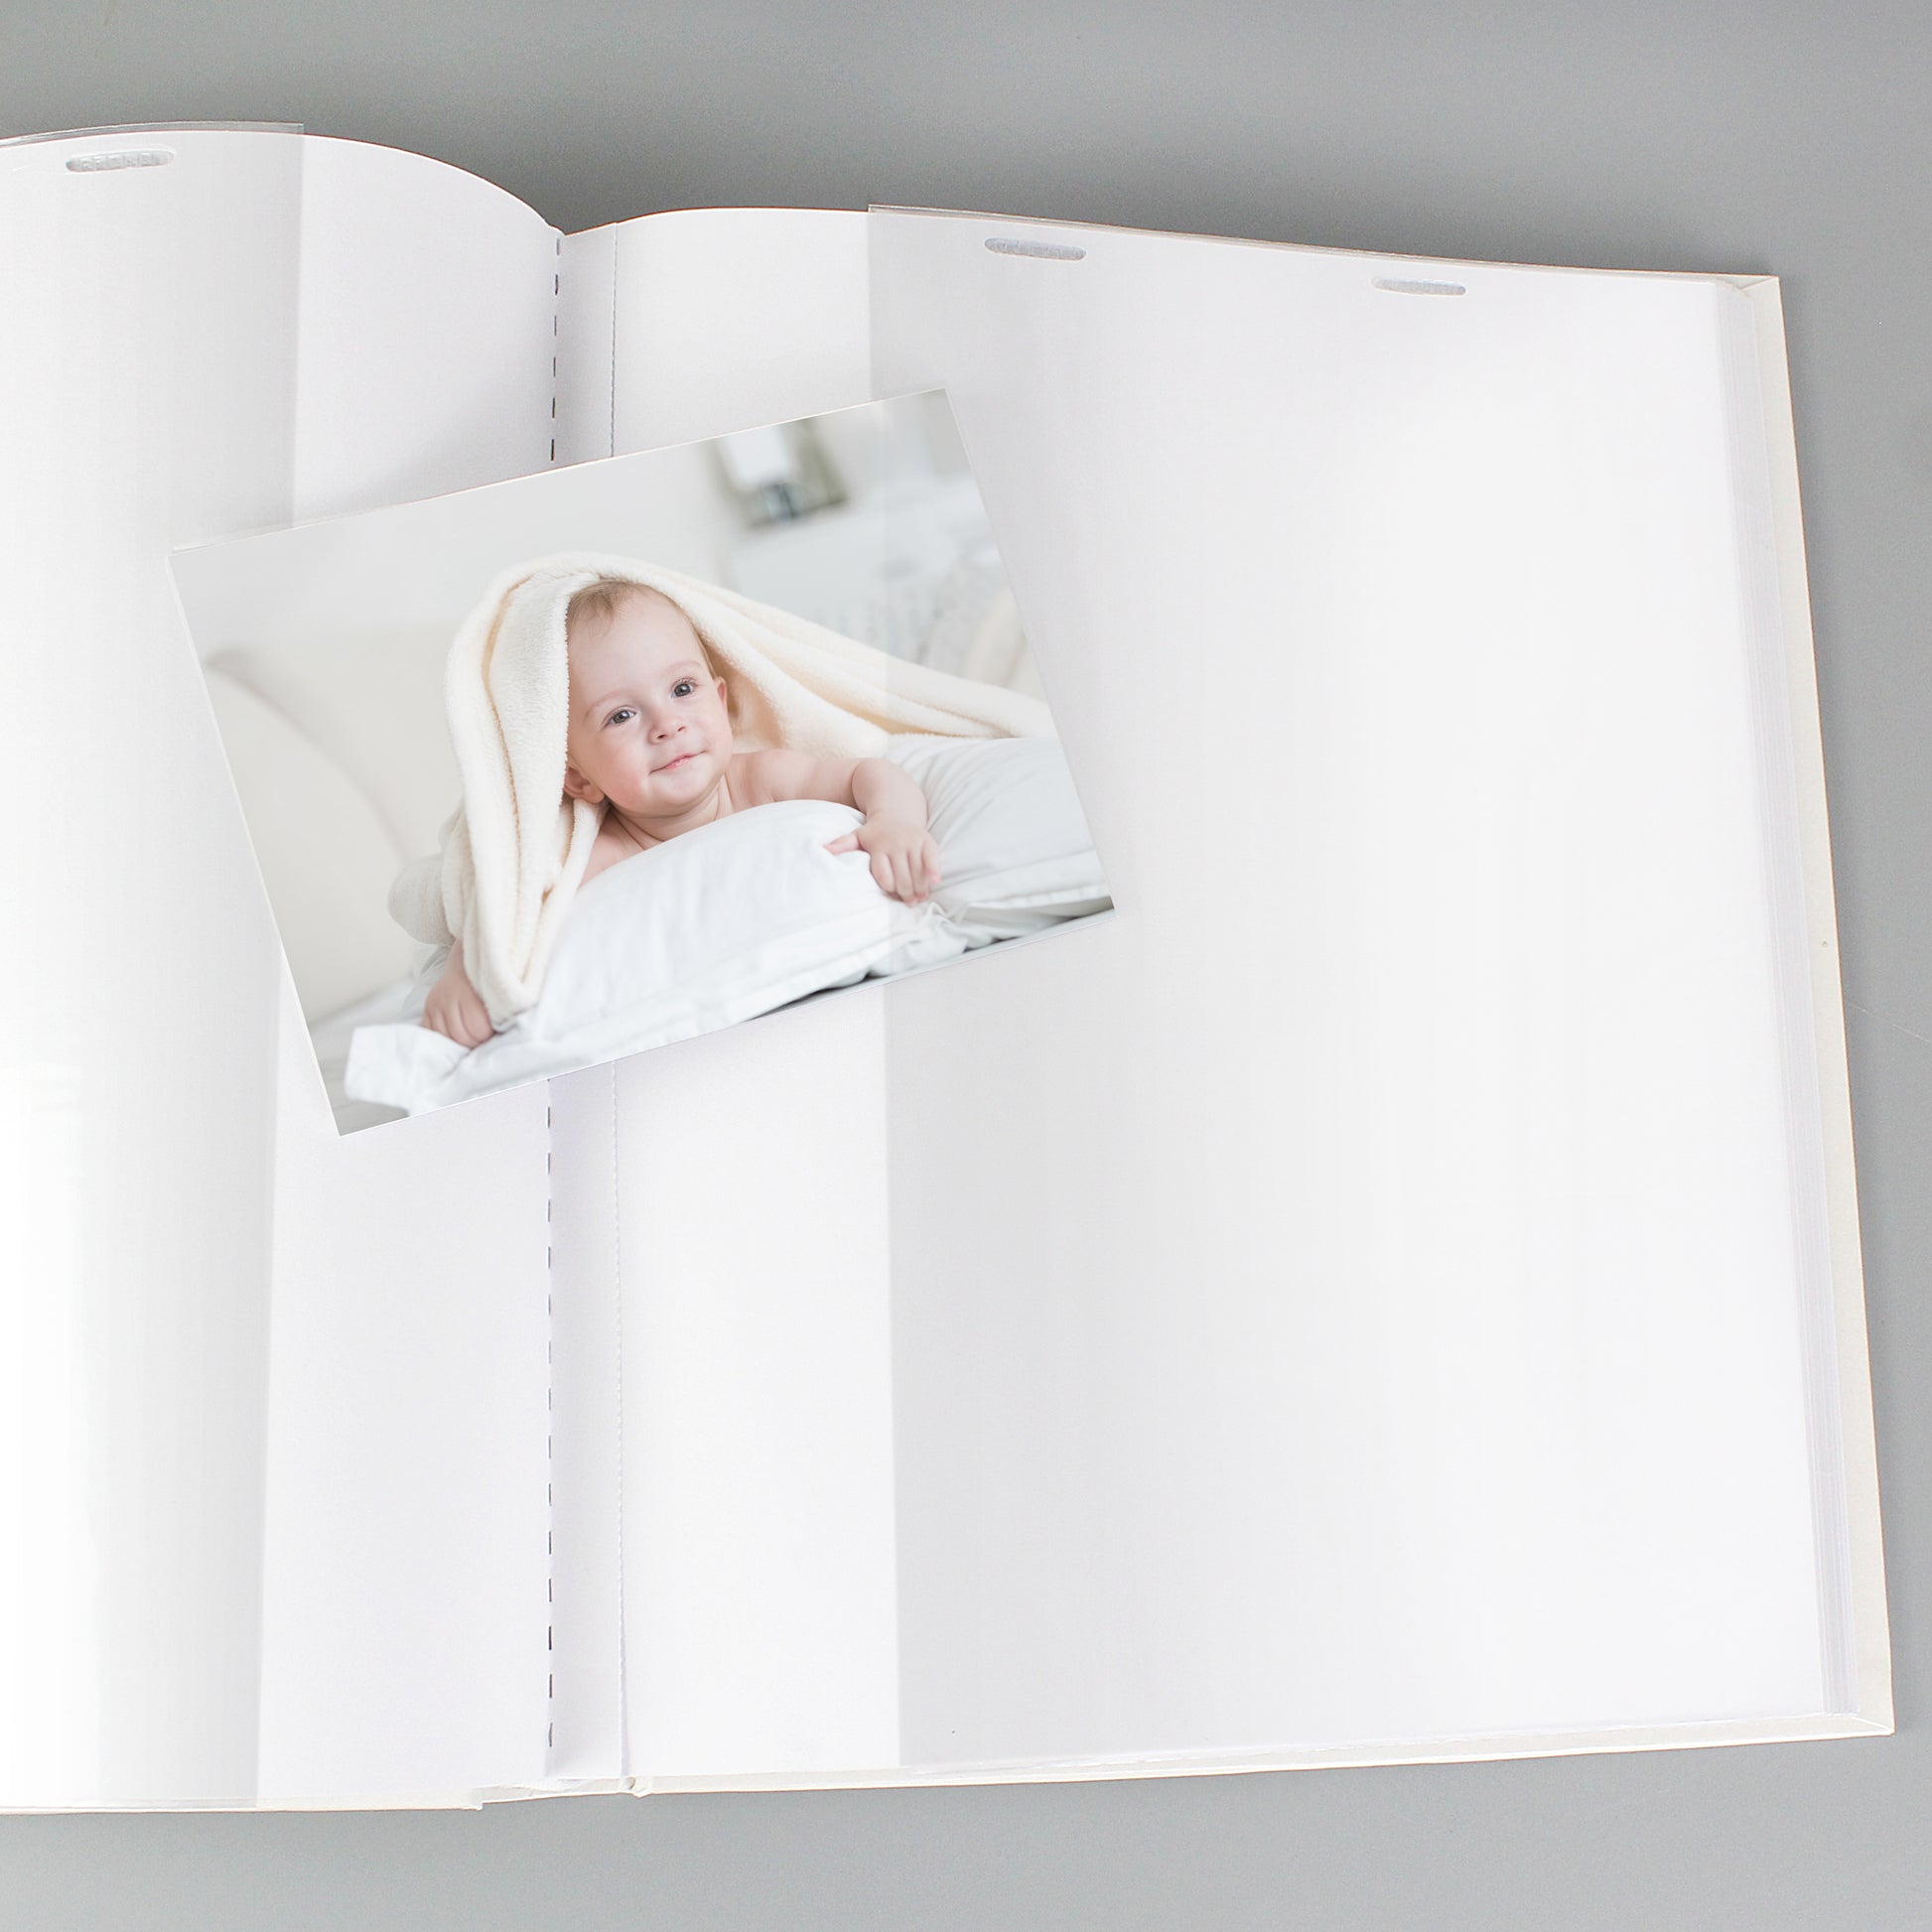 Personalised Christening Photo Album With Sleeves